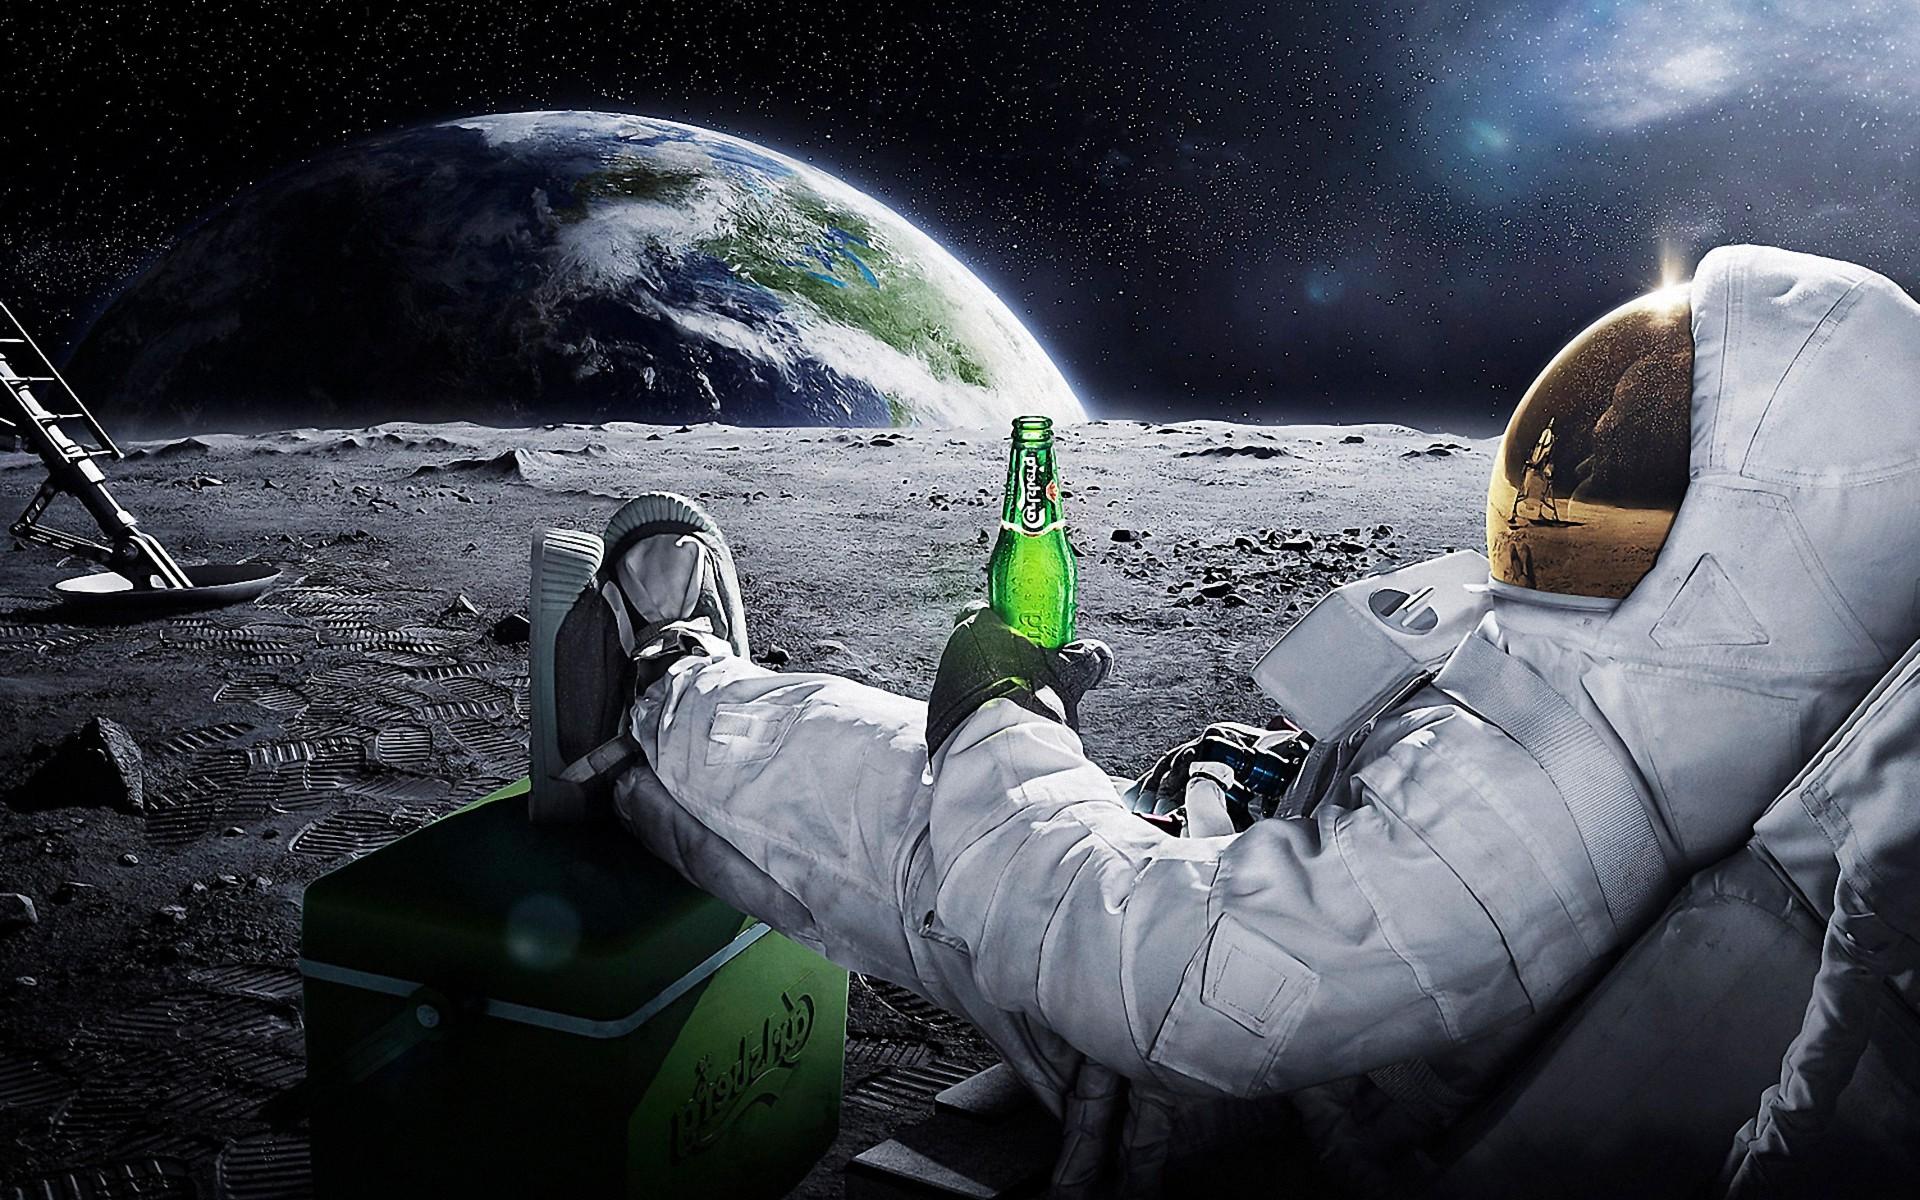 Download hd wallpapers of Astronauts Drinking on Moon download 1920x1200